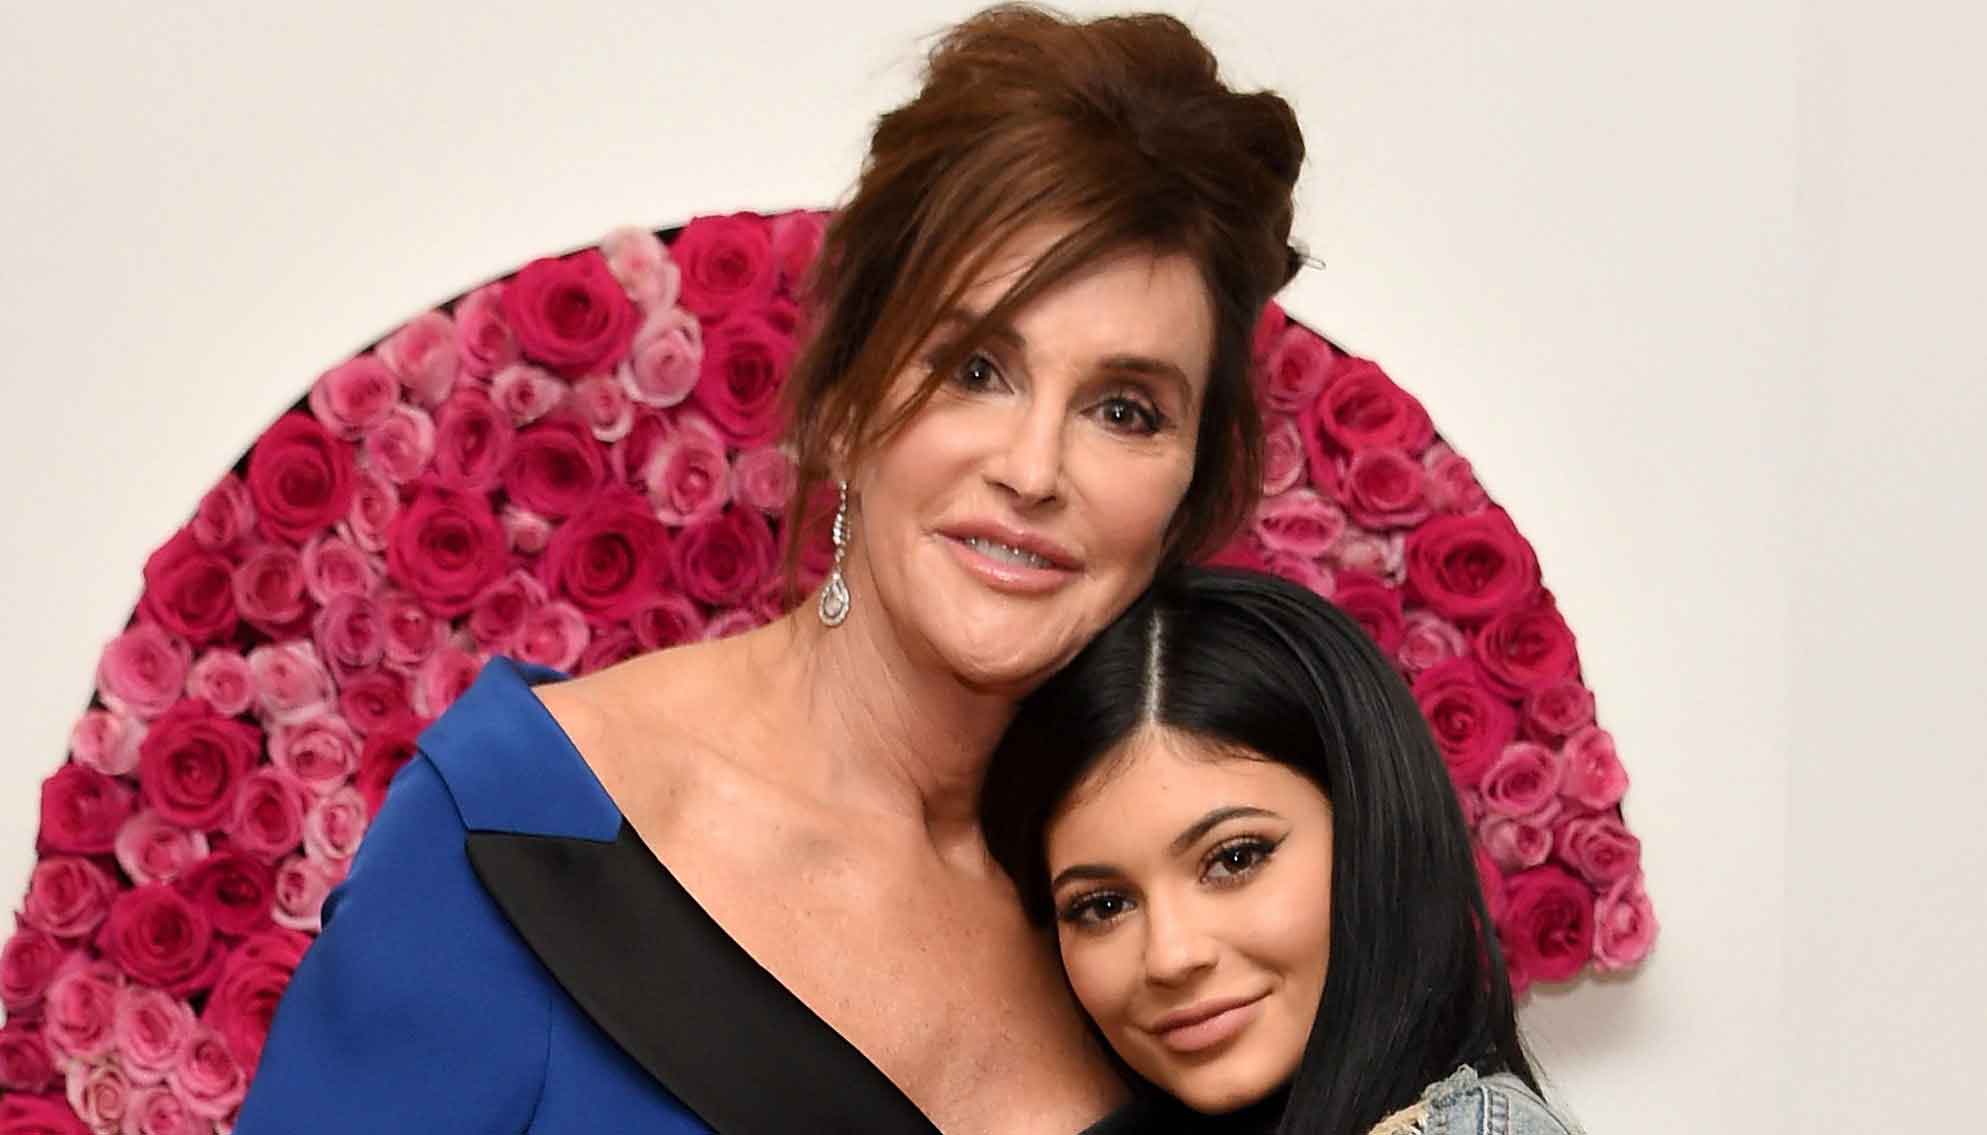 Caitlyn Jenner opens up about life after transition with Kylie Jenner